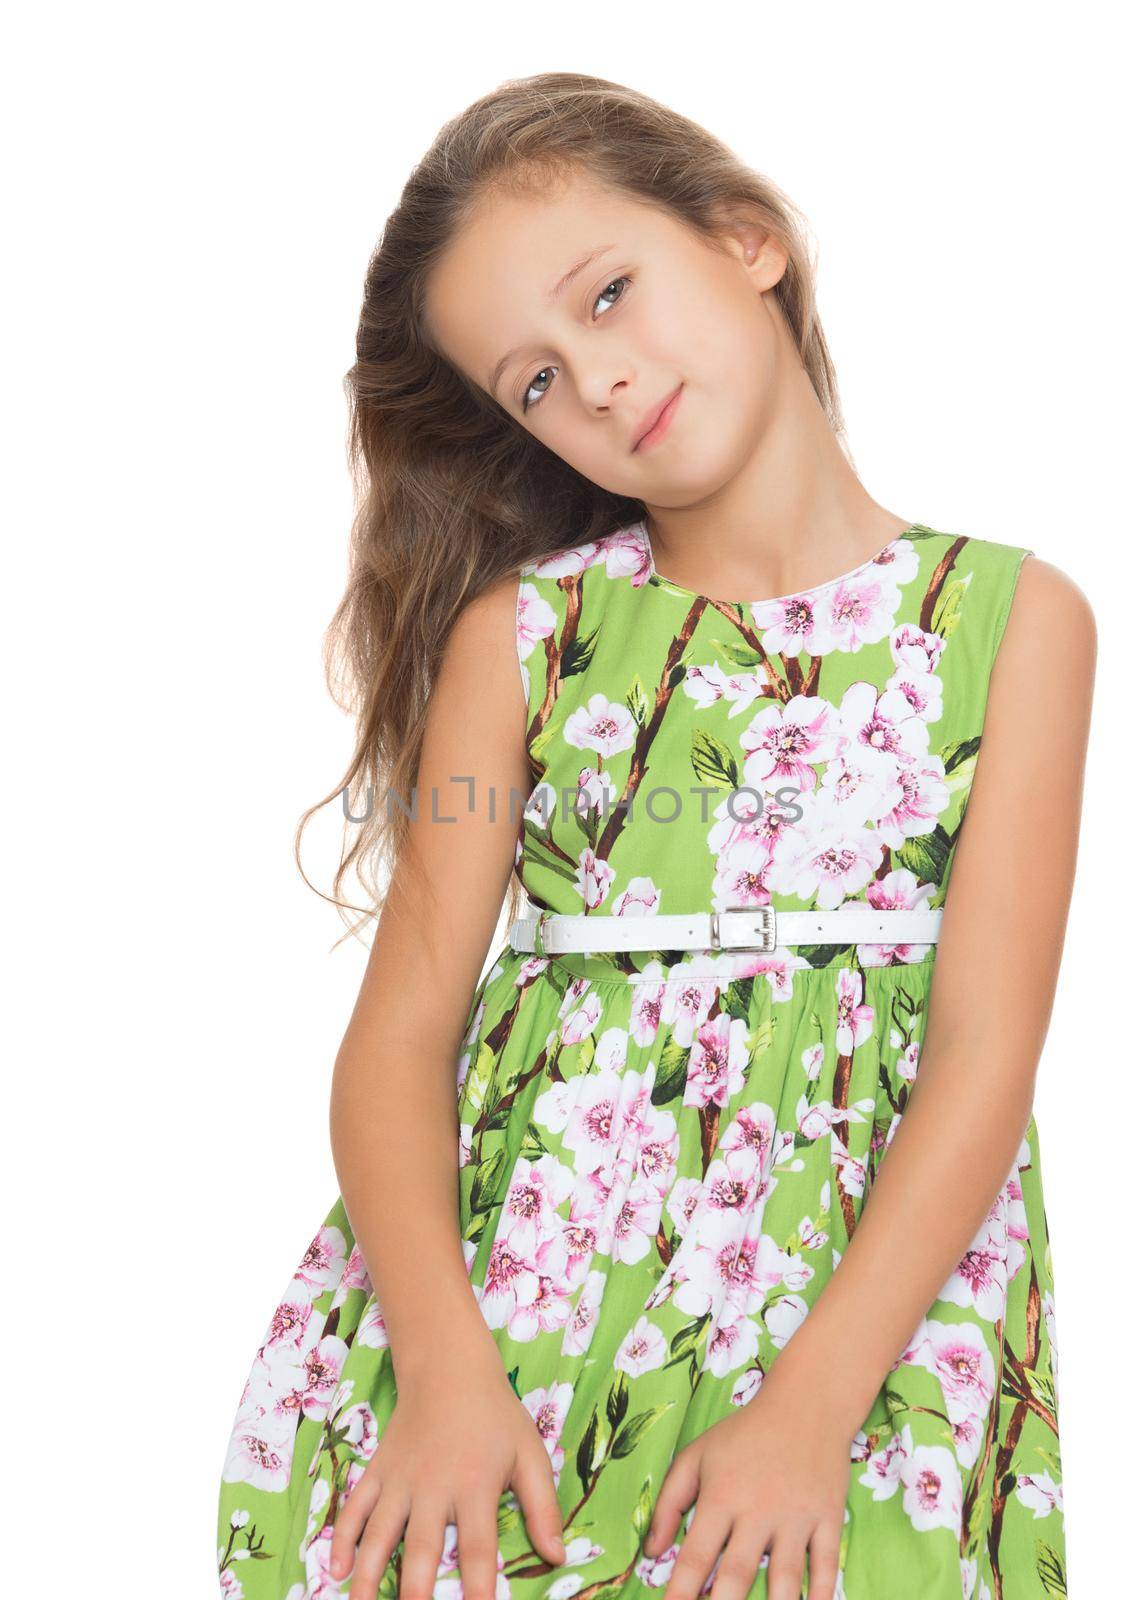 Closeup portrait of beautiful fair-haired little girl - Isolated on white background